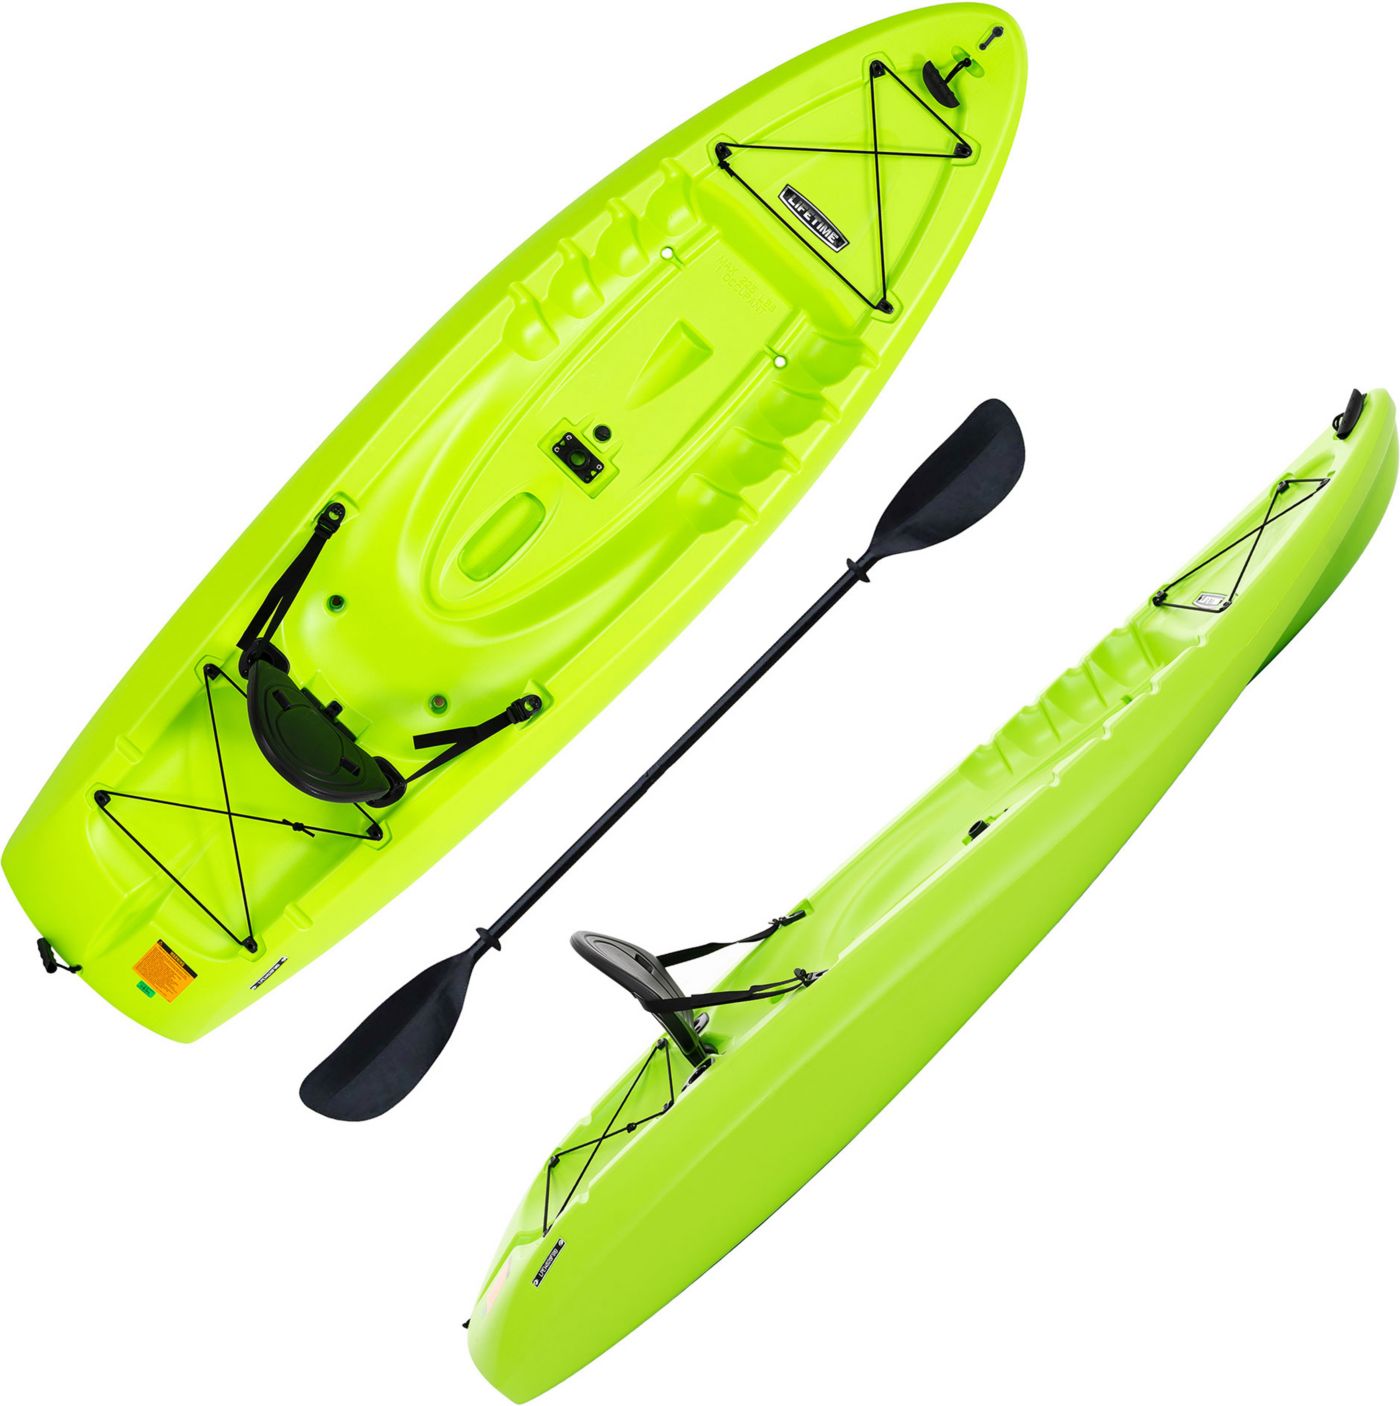 Lifetime Hydros 85 Angler Kayak with Paddle | DICK'S Sporting Goods